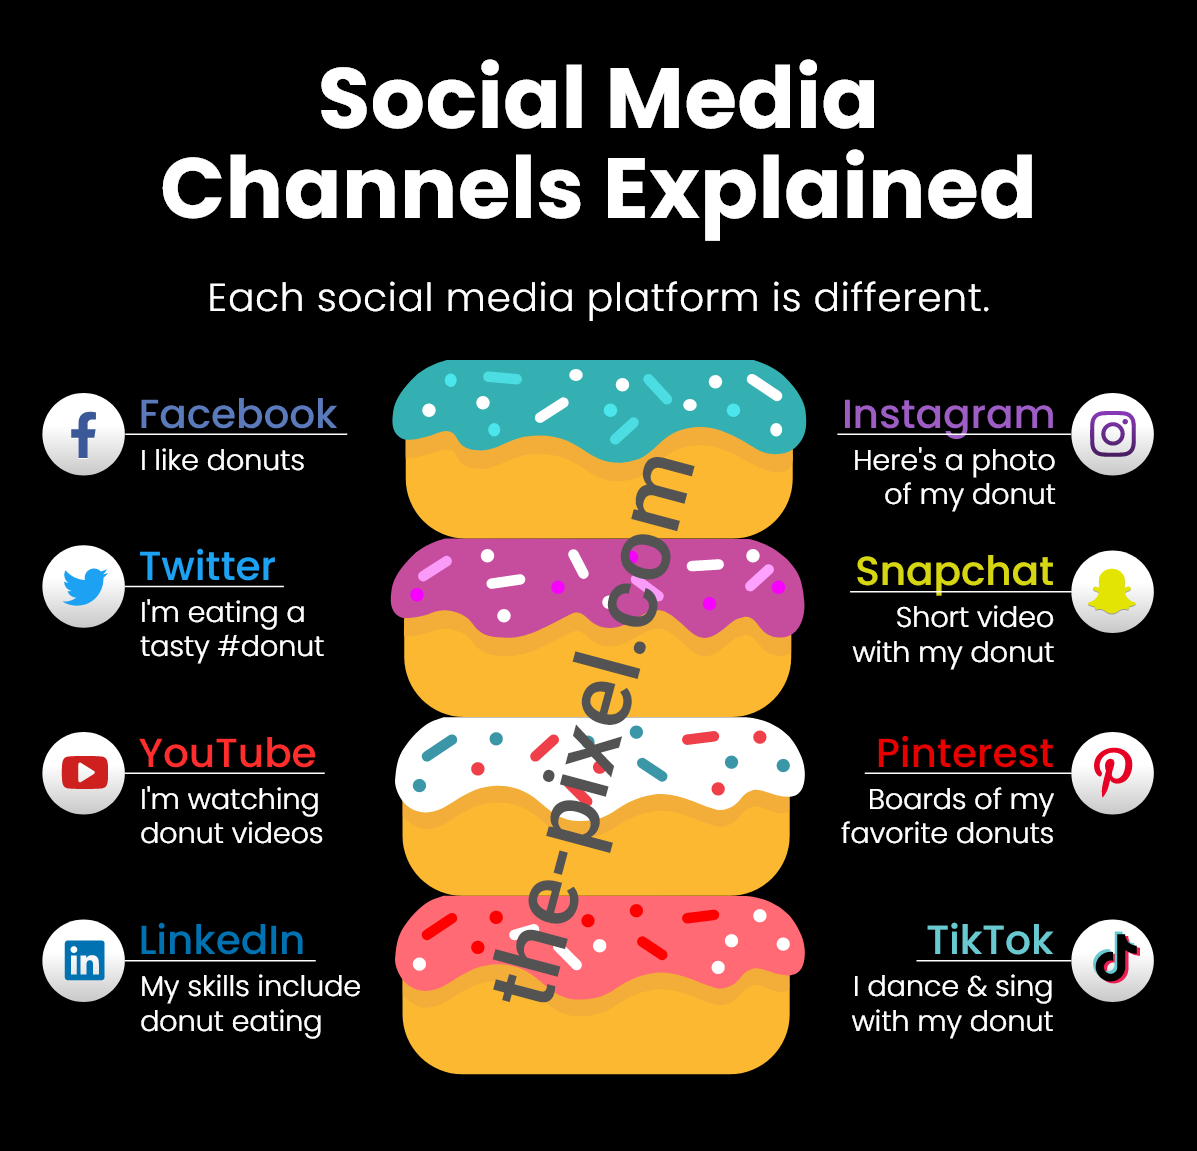 Social Media Channels Explained and HowTo Use Different Platforms